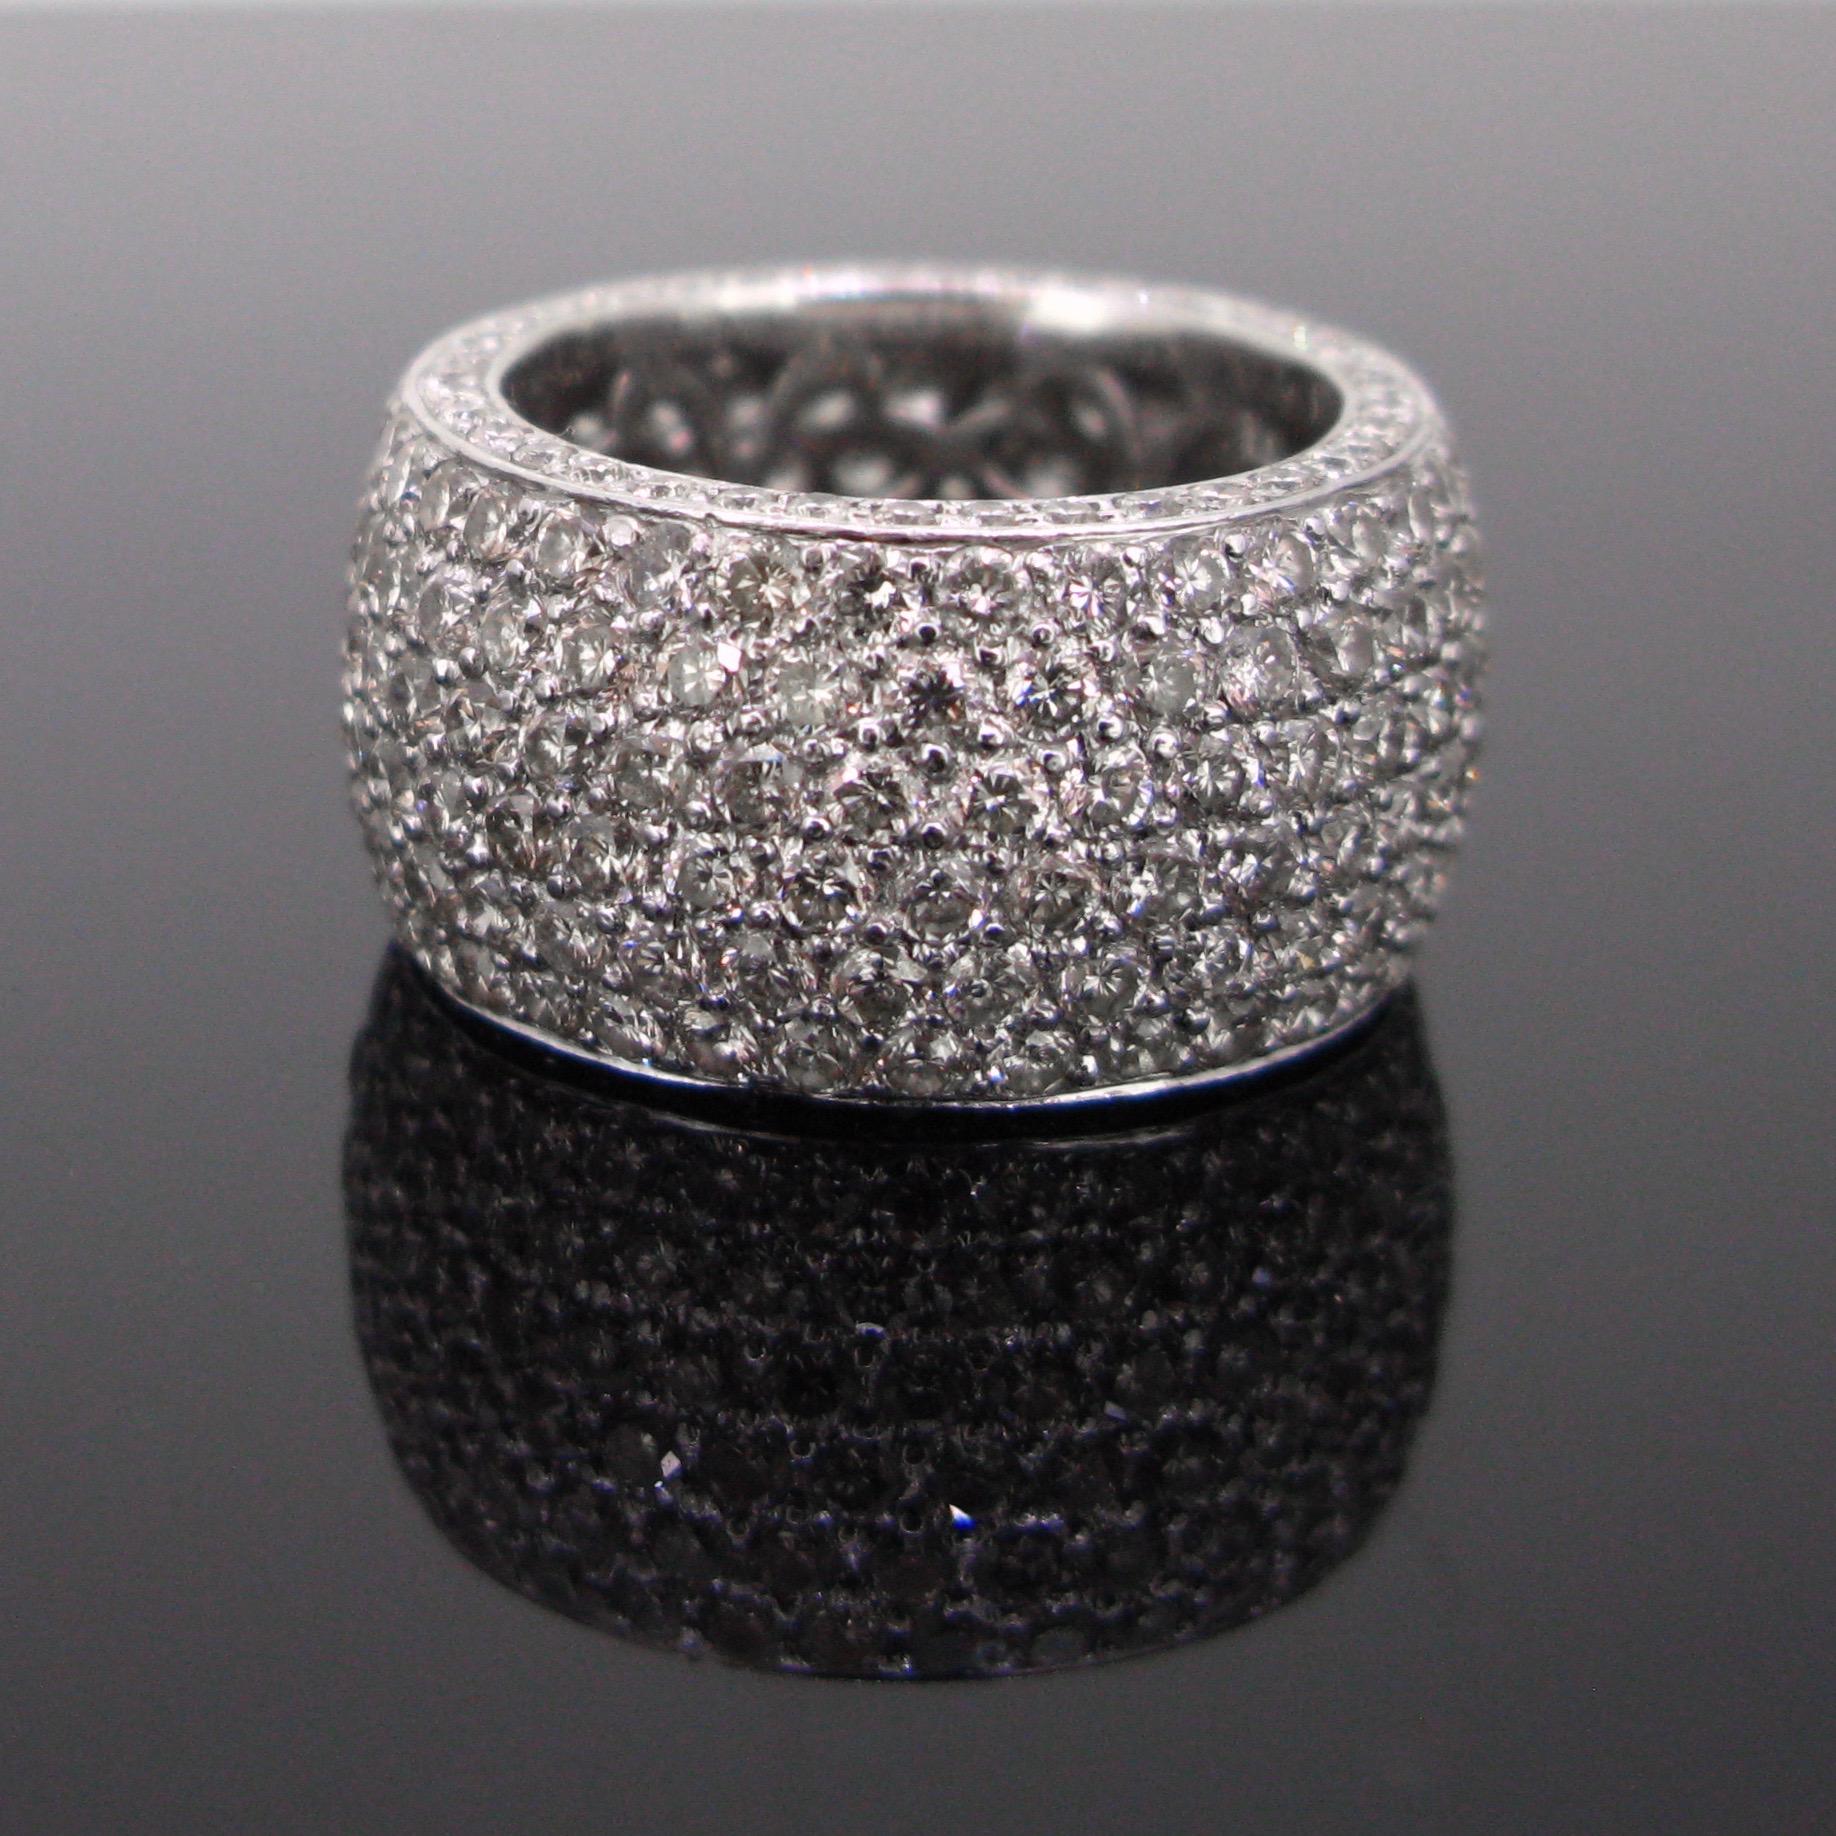 This beautiful band ring is paved with 6 lines of brilliant cut diamonds. The ring is engraved inside with D692 for the total carat weight.  There is a a total carat weight of 6.92ct. It has a nice flowery design inside. The ring was also adorned